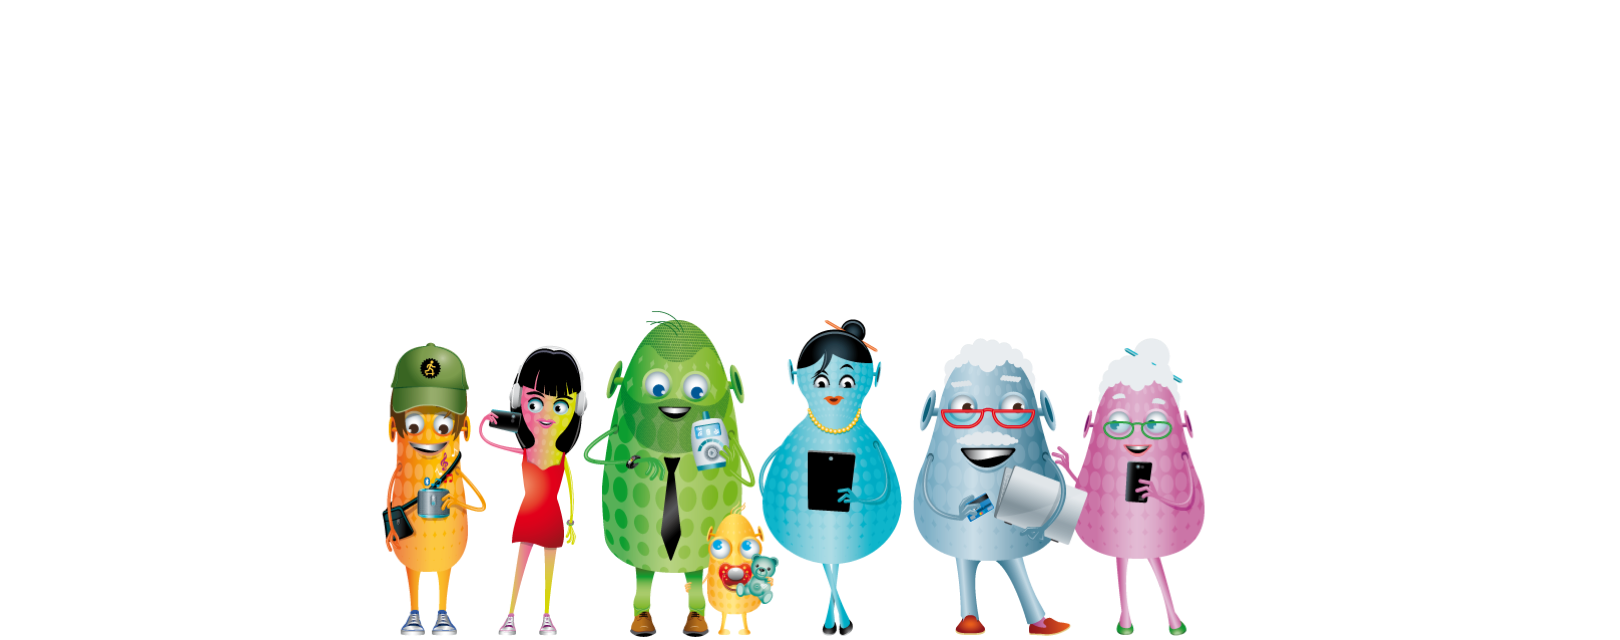 cyber quiz famille.png